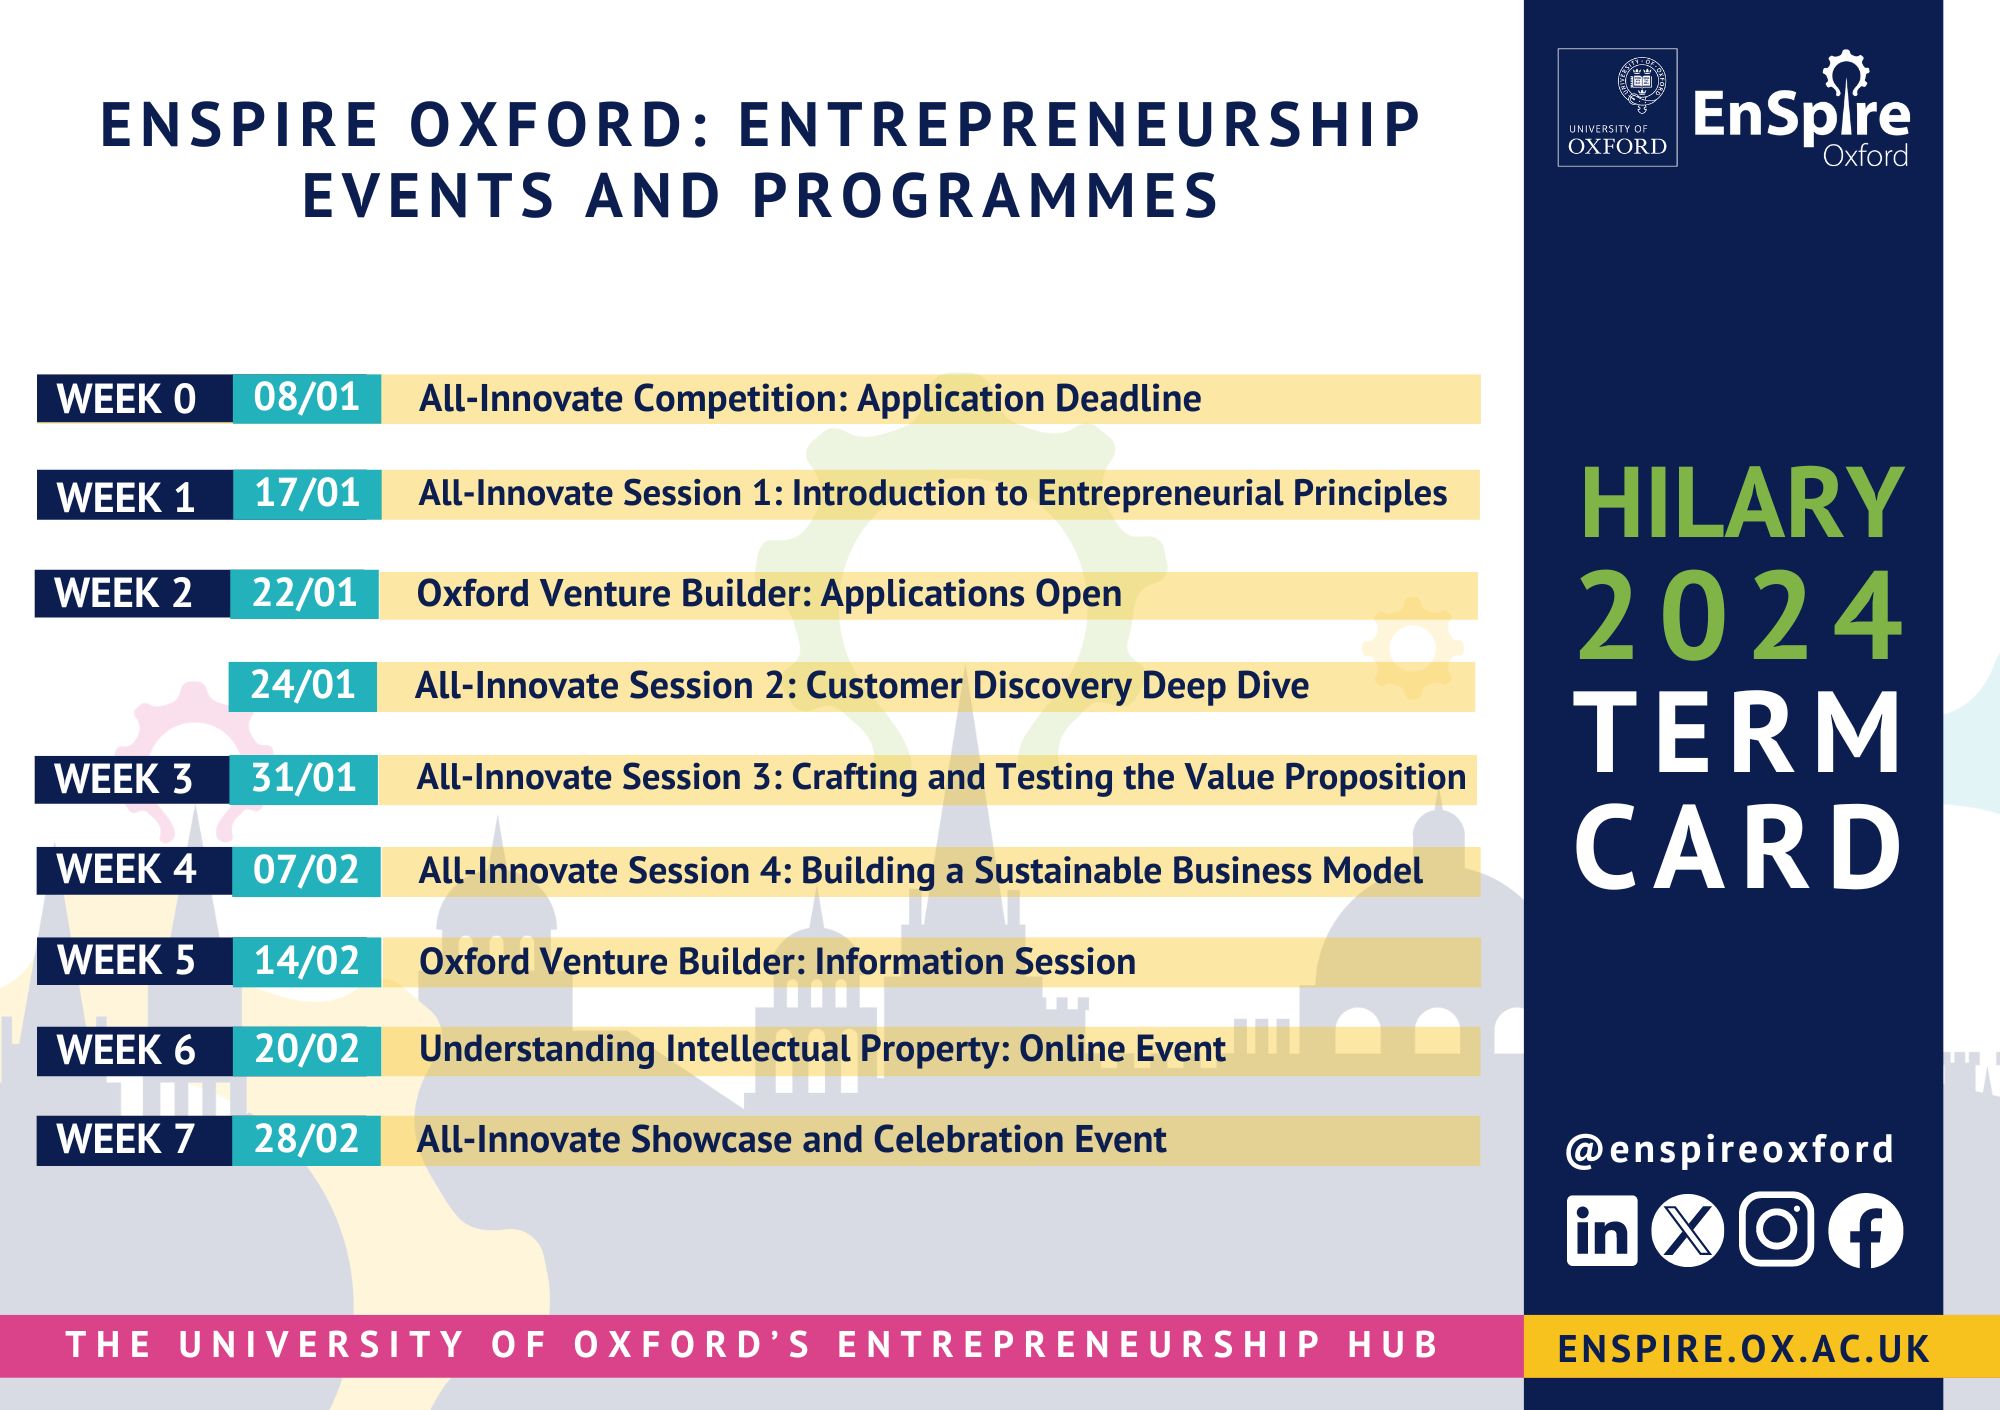 hilary 24 term card event and programme dates list